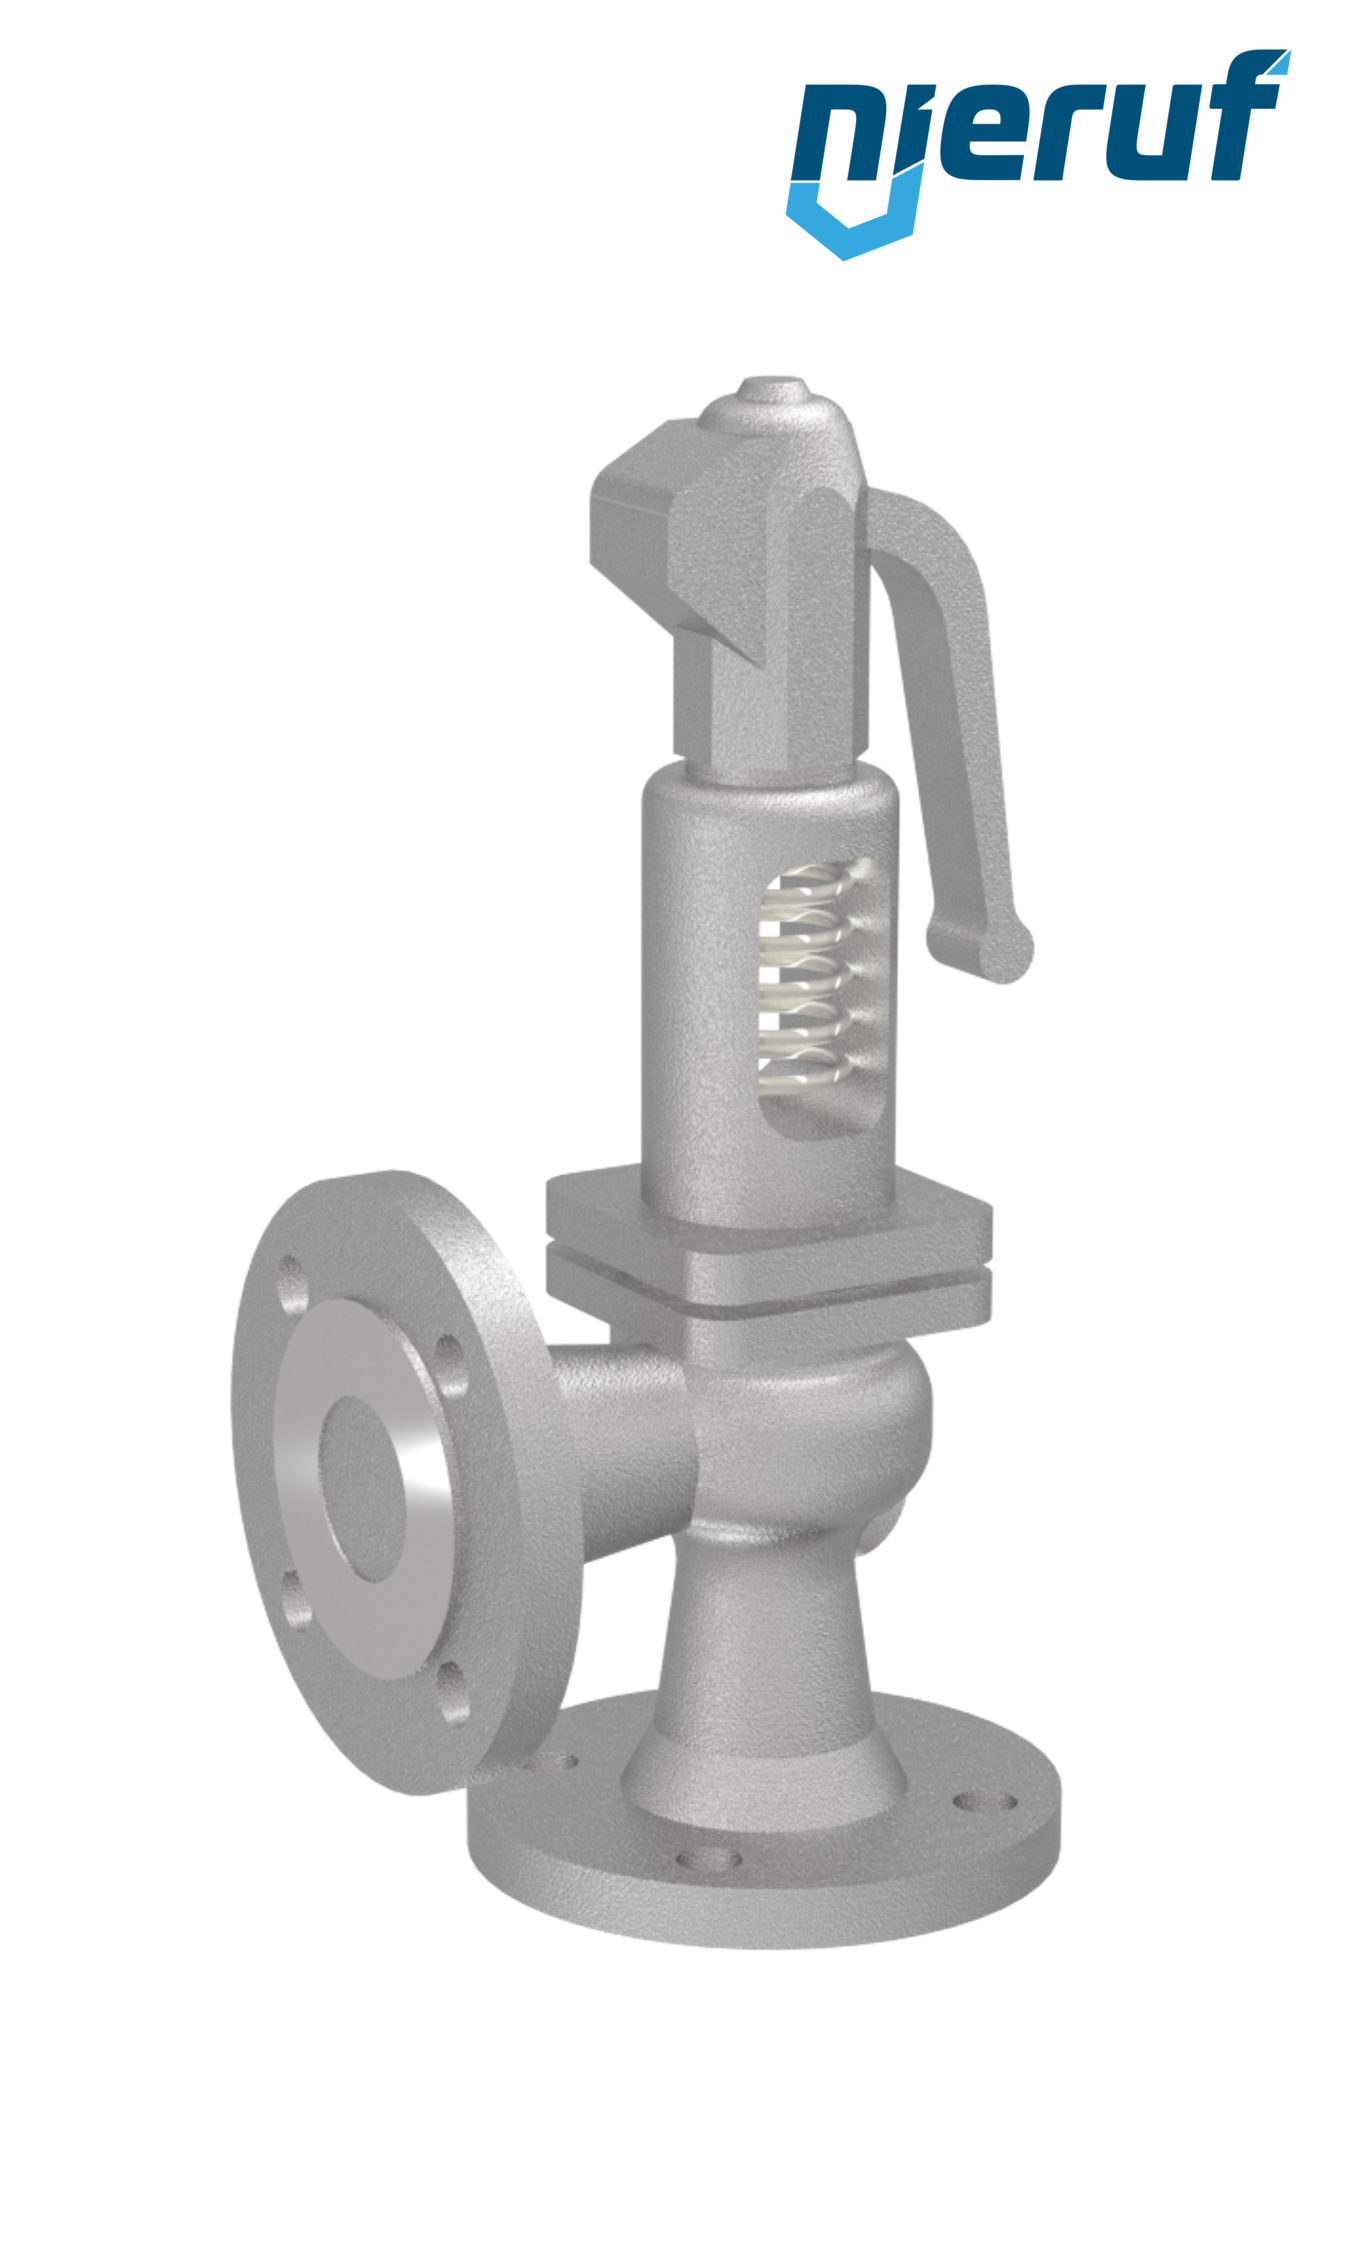 flange-safety valve DN15/DN15 SF0202, cast steel metal, with lever